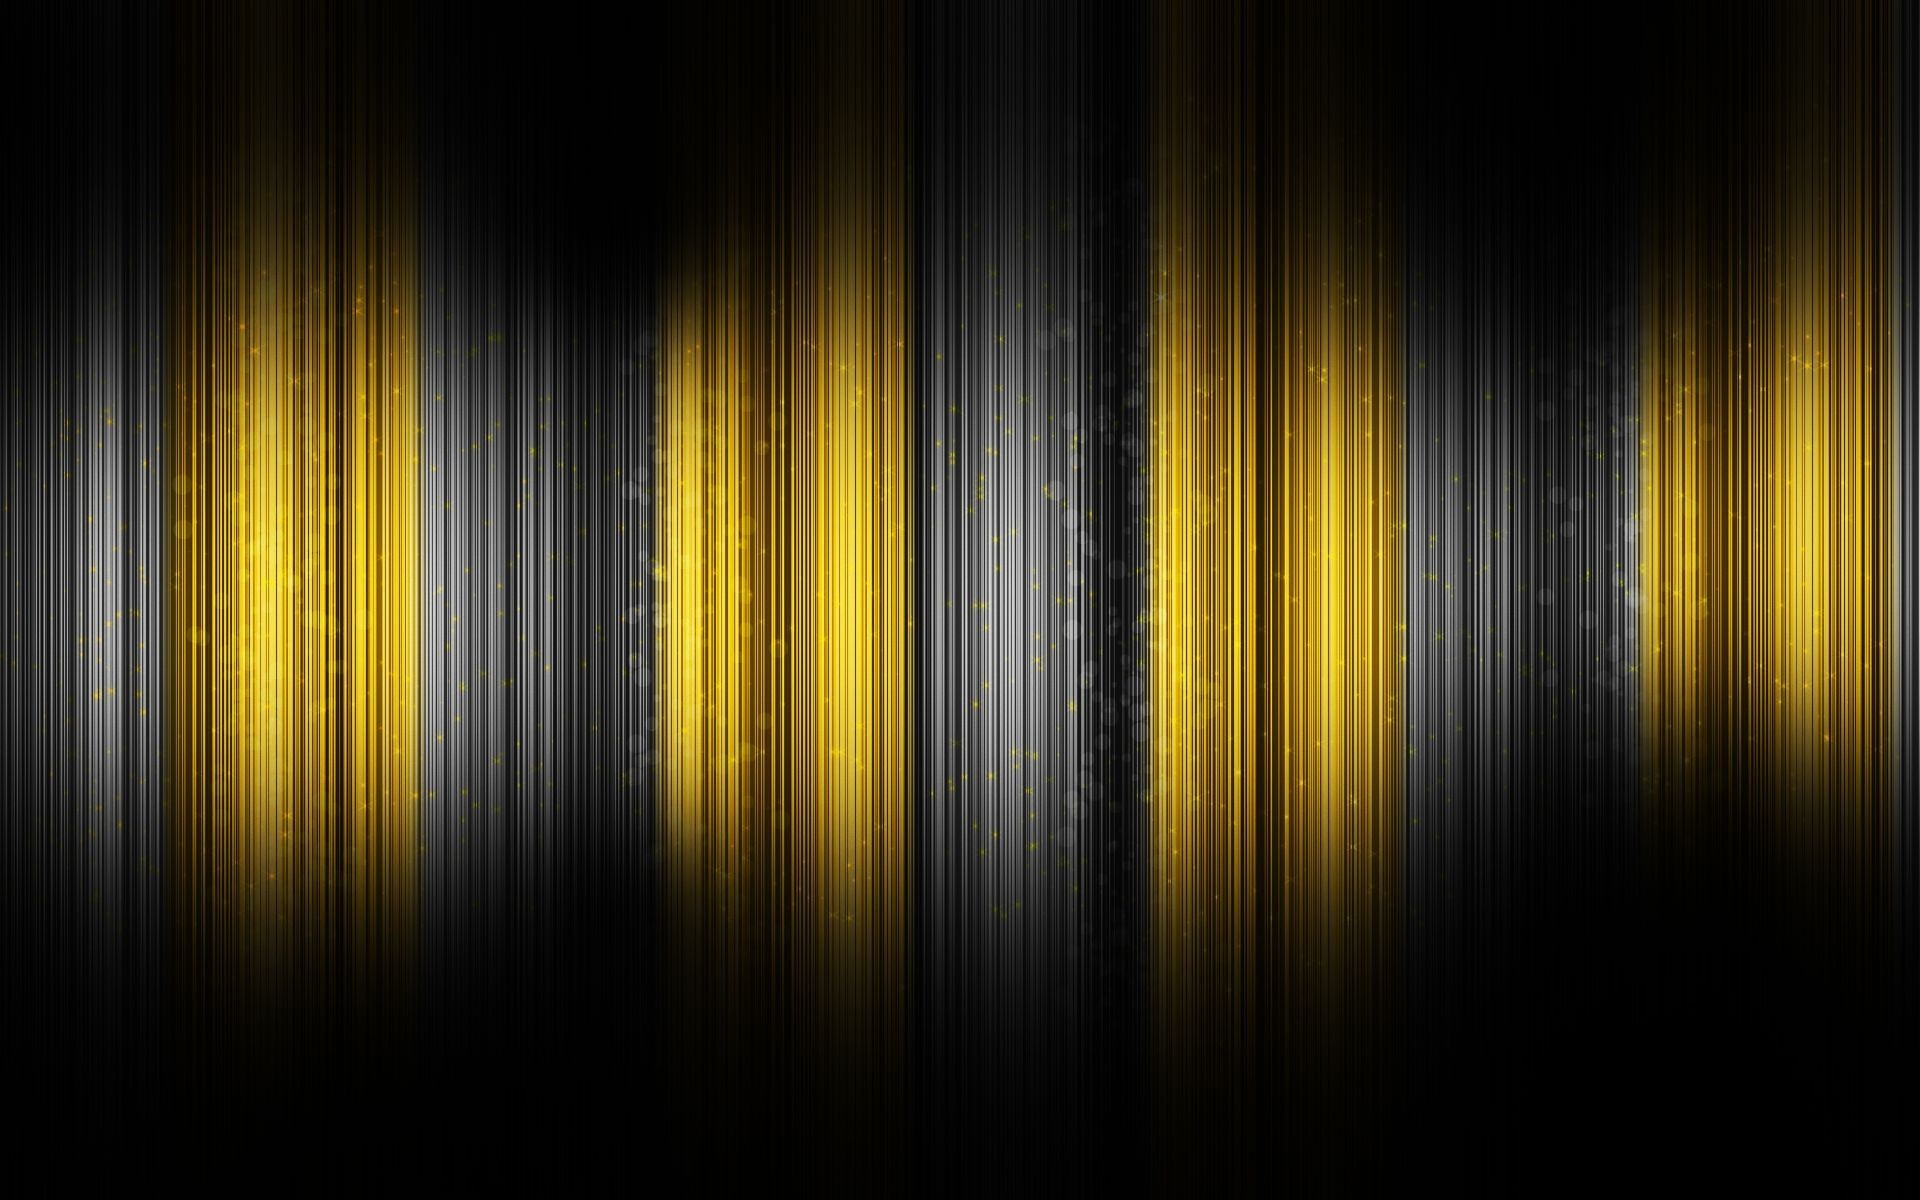 Abstract-yellow-and-black-latest-hd-wallpaper – Â· Background Hd  WallpaperMusic …